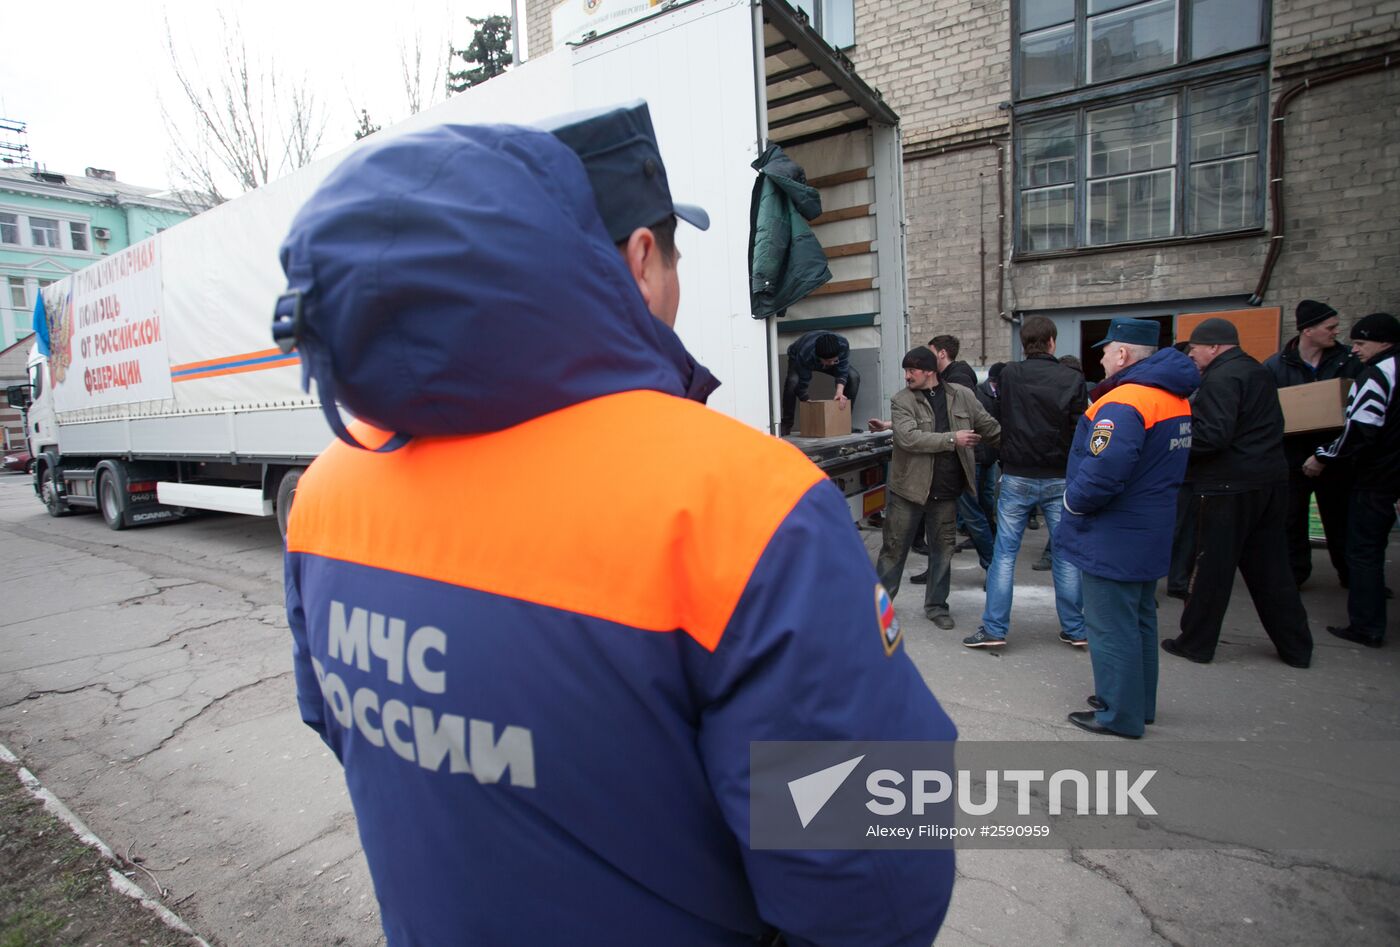 19th humanitarian aid convoy arrives in Donetsk